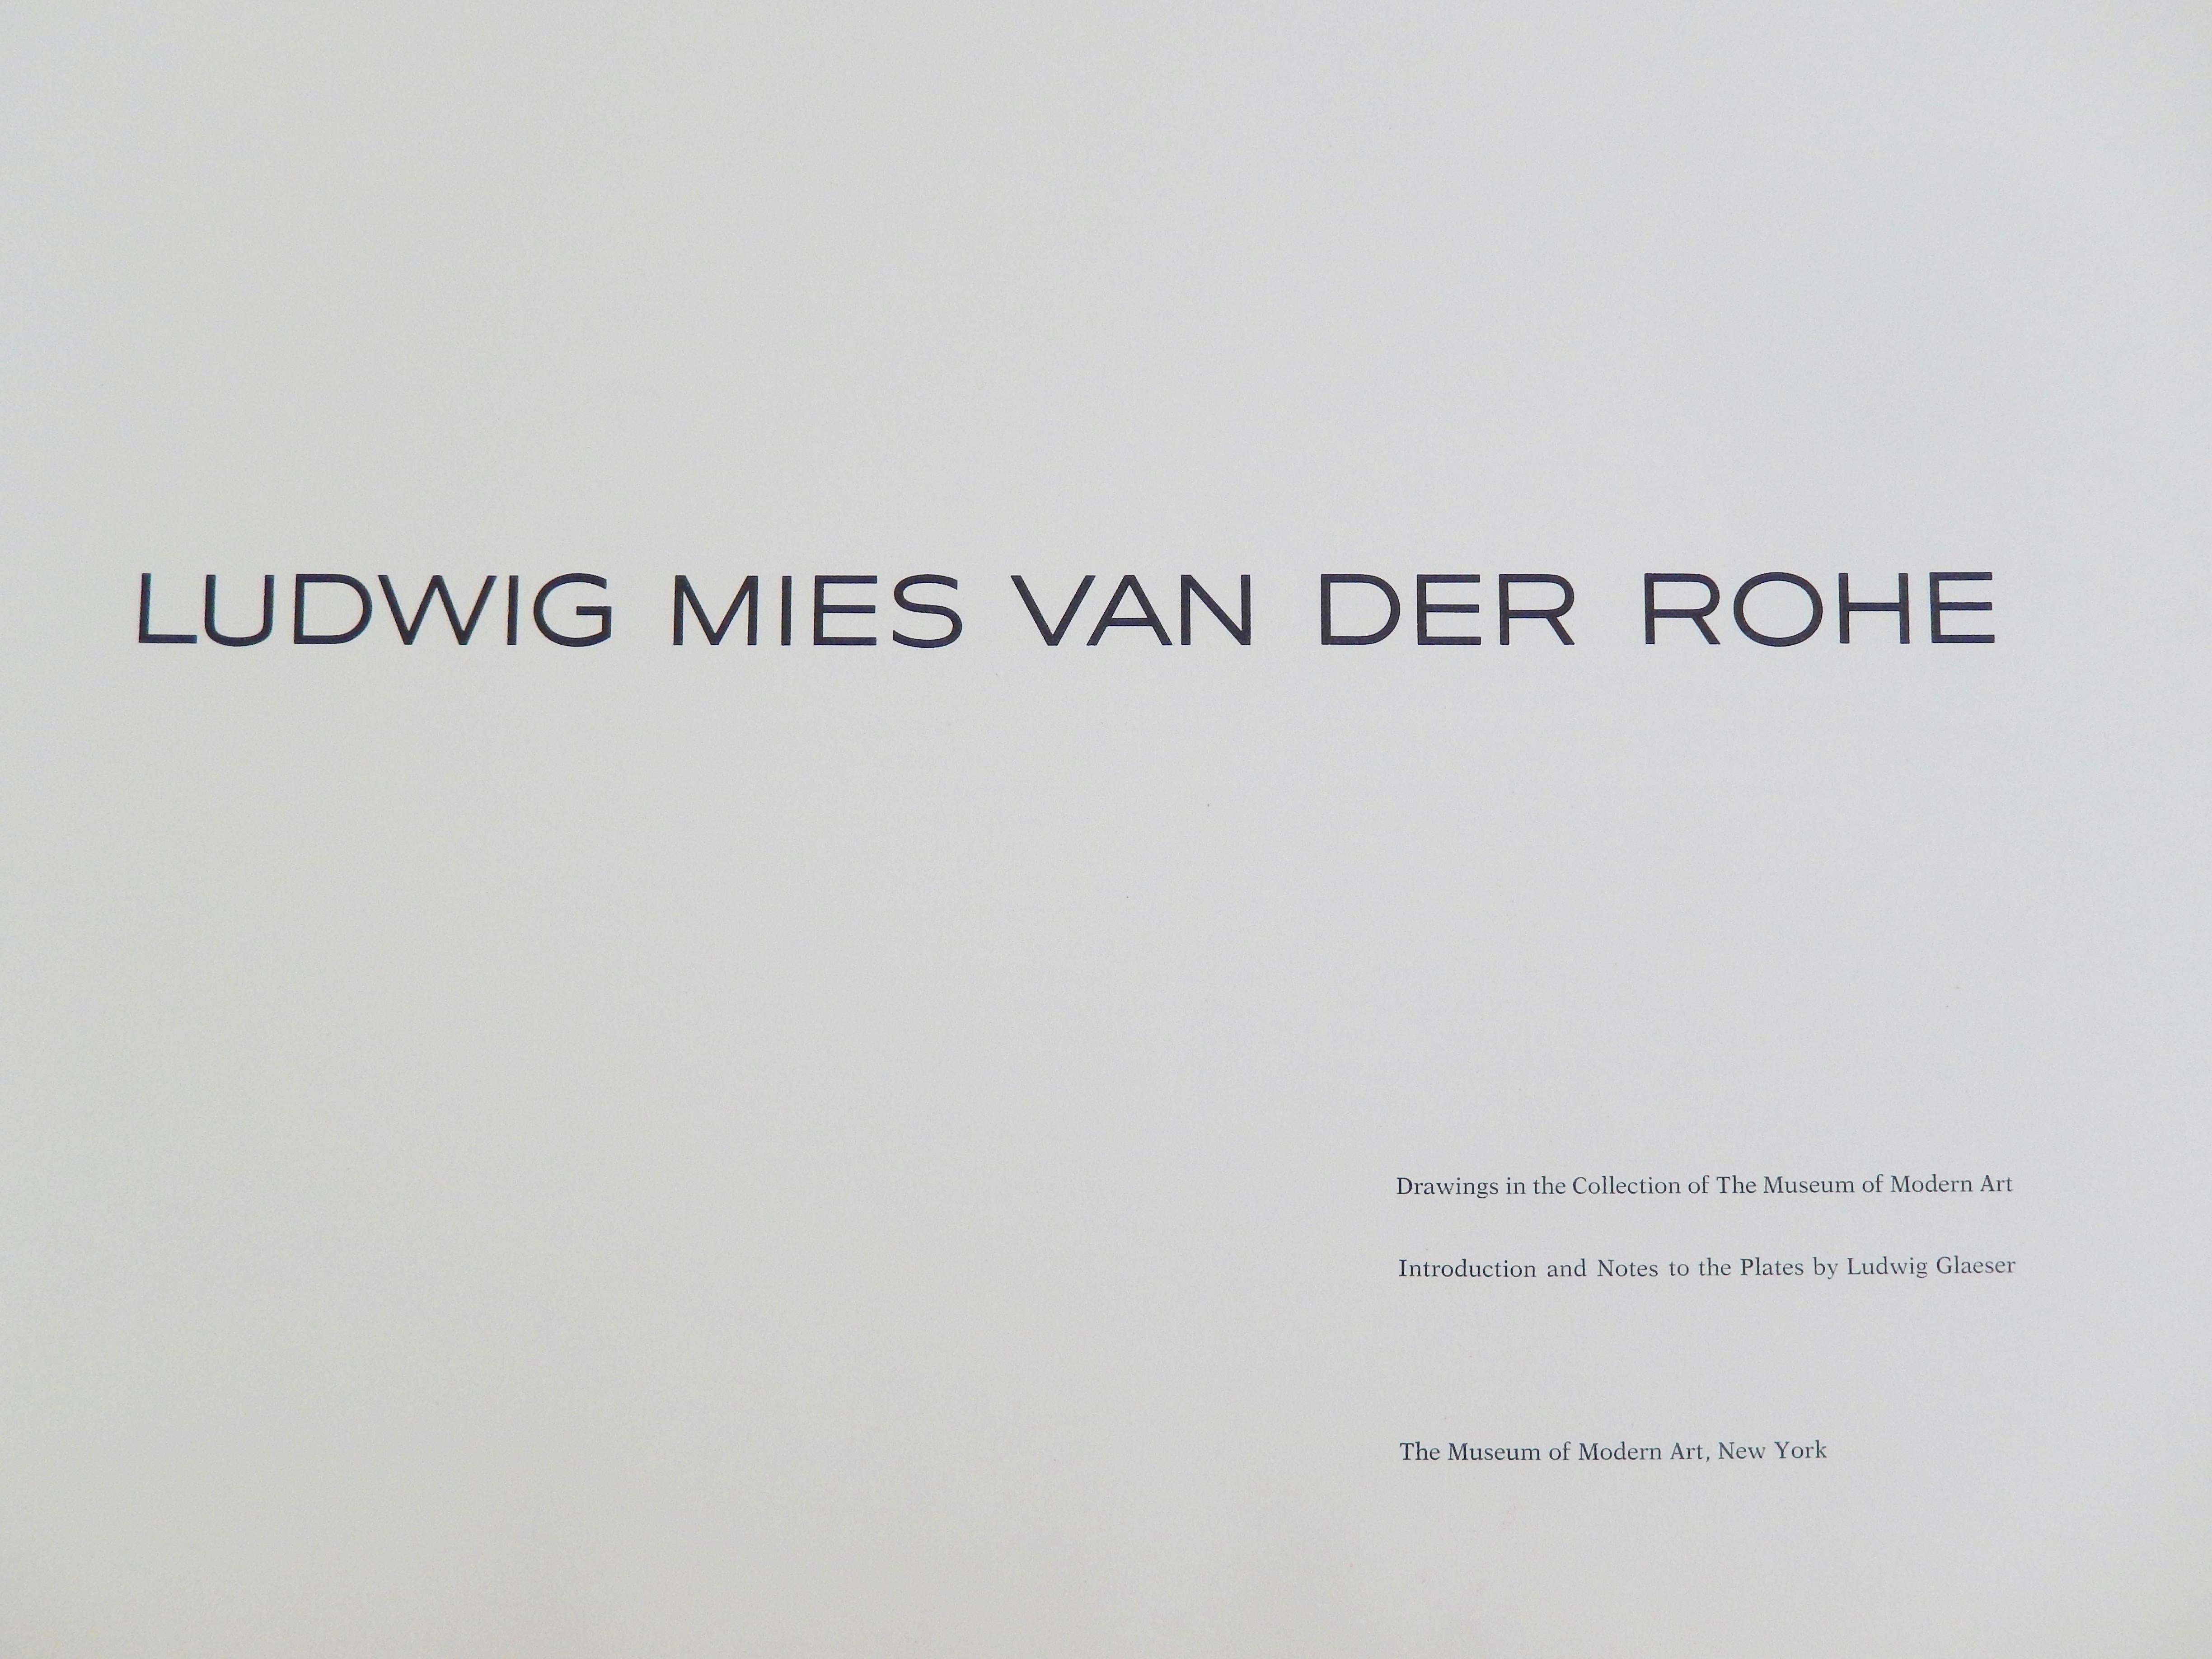 Ludwig Mies van der Rohe: Drawings in the Collection of the Museum of Modern Art by Ludwig Glaeser, a important, out-of-print spiral bound folio with original plates of architectural sketches. This large, oblong book consists of 31 plates in color